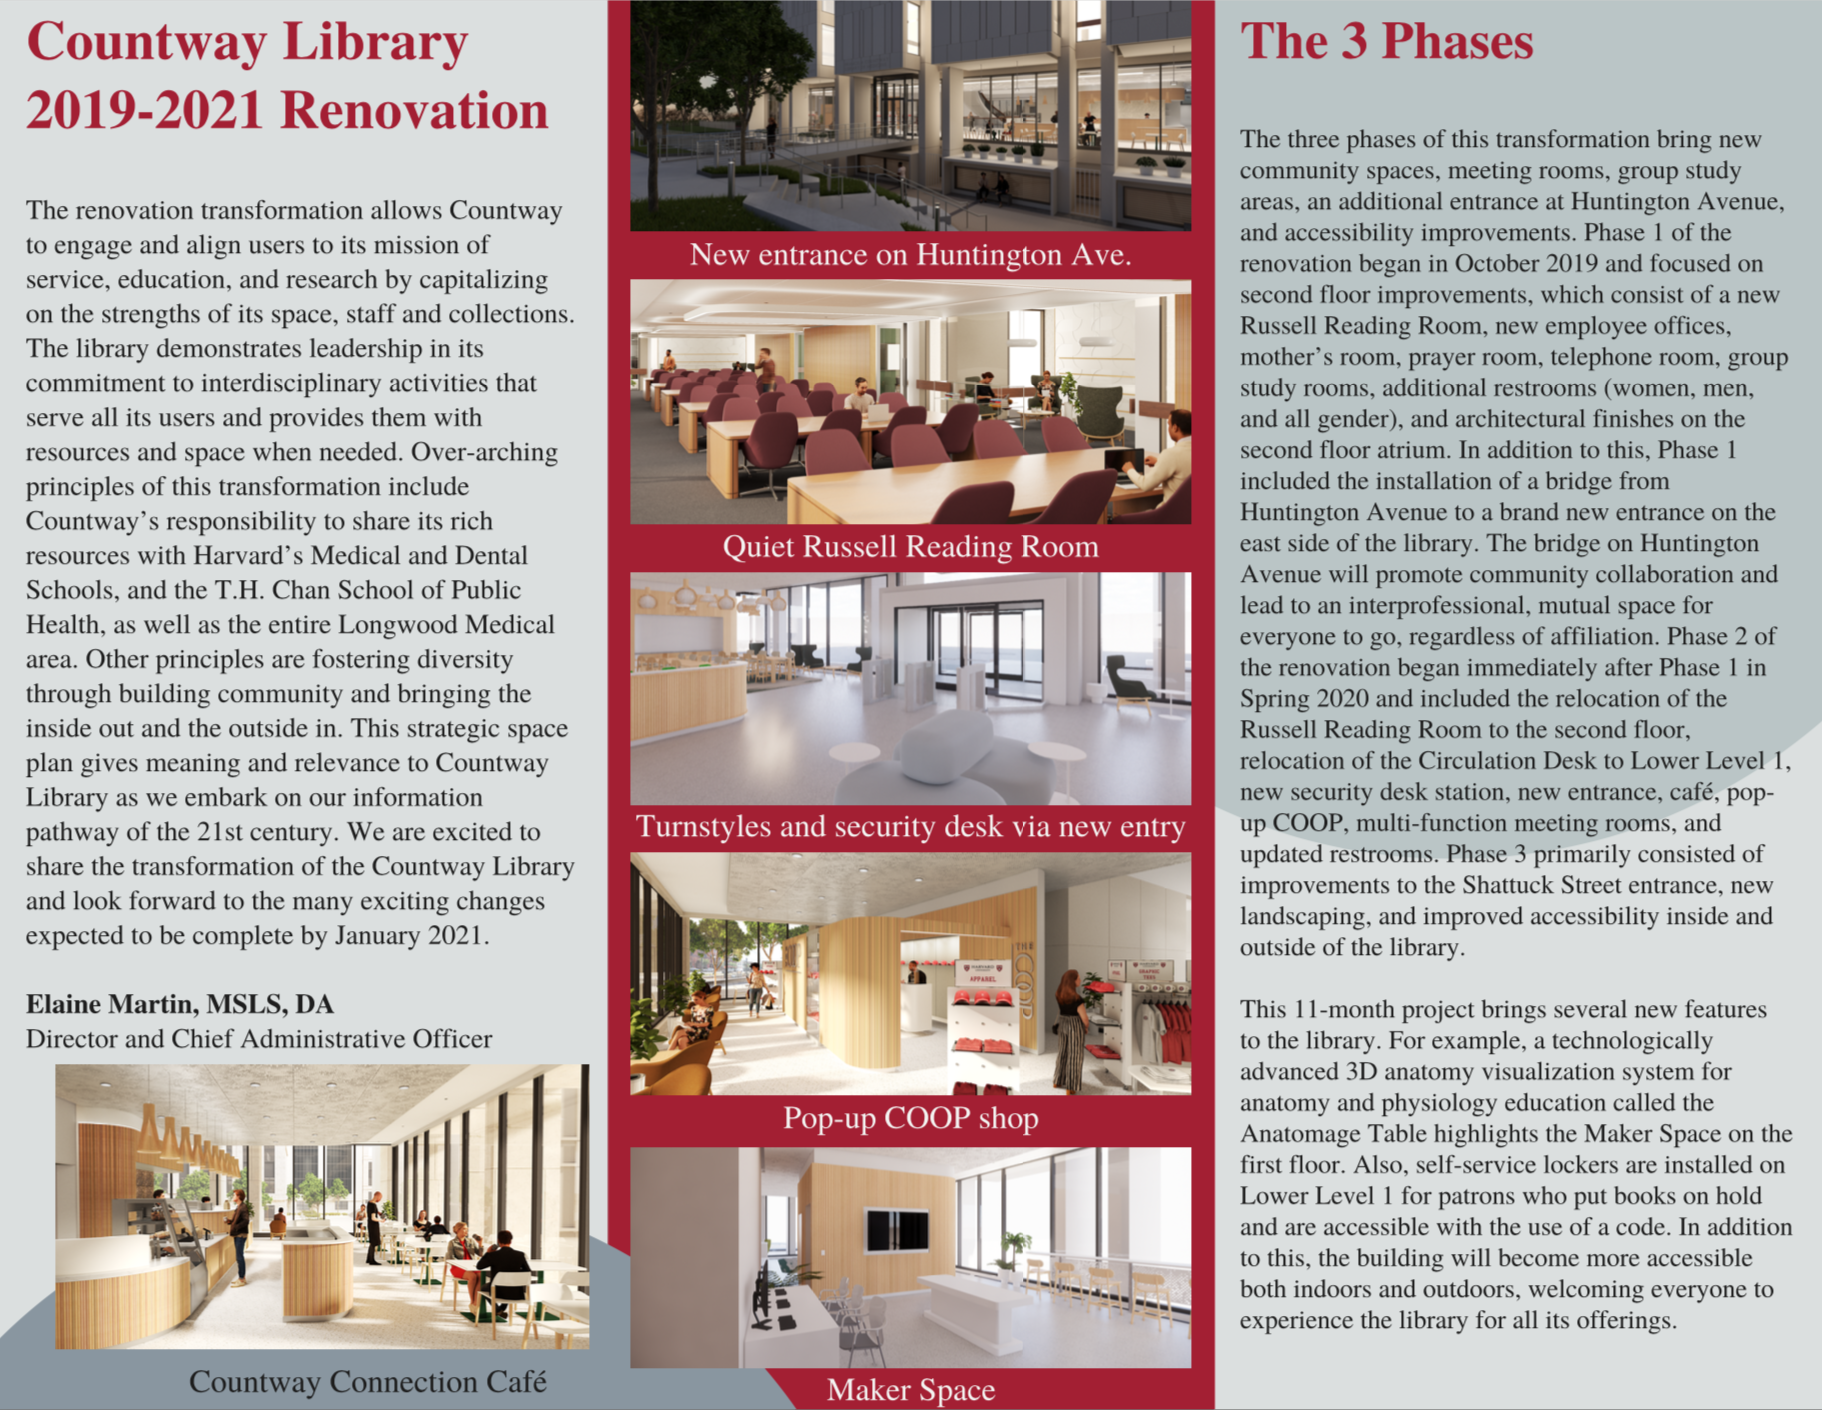 Countway Library renovation brochure page 1 with 3 vertical panels. Panel 1 has the heading Countway Library 2019-2021 Renovation. The text below reads:
The renovation transformation allows Countway to engage and align users to its mission of service, education, and research by capitalizing on the strengths of its space, staff and collections. The library demonstrates leadership in its commitment to interdisciplinary activities that serve all its users and provides them with resources and space when needed. Over-arching principles of this transformation include Countway’s responsibility to share its rich resources with Harvard’s Medical and Dental Schools, and the T.H. Chan School of Public Health, as well as the entire Longwood Medical area. Other principles are fostering diversity through building community and bringing the inside out and the outside in. This strategic space plan gives meaning and relevance to Countway Library as we embark on our information pathway of the 21st century. We are excited to share the transformation of the Countway Library and look forward to the many exciting changes expected to be complete by January 2021. Elaine Martin, MSLS, DA Director and Chief Administrative Officer, followed by a picture rendering of the Countway Connection Café. Panel 2 includes a picture rendering of the new library entrance on Huntington Ave., a picture rendering of the new quiet Russell Reading Room, a picture rendering of turnstiles via new entry, a picture rendering of pop-up COOP shop, and a picture rendering of Makerspace area. Panel 3 has the heading The 3 Phases. The text reads: The three phases of this transformation bring new community spaces, meeting rooms, group study areas, an additional entrance at Huntington Avenue, and accessibility improvements. Phase 1 of the renovation began in October 2019 and focused on second floor improvements, which consist of a new Russell Reading Room, new employee offices, mother’s room, prayer room, telephone room, group study rooms, additional restrooms (women, men, and all gender), and architectural finishes on the second floor atrium. In addition to this, Phase 1 included the installation of a bridge from Huntington Avenue to a brand new entrance on the east side of the library. The bridge on Huntington Avenue will promote community collaboration and lead to an interprofessional, mutual space for everyone to go, regardless of affiliation. Phase 2 of the renovation began immediately after Phase 1 in Spring 2020 and included the relocation of the Russell Reading Room to the second floor, relocation of the Circulation Desk to Lower Level 1, new security desk station, new entrance, café, pop-up COOP, multi-function meeting rooms, and updated restrooms. Phase 3 primarily consisted of improvements to the Shattuck Street entrance, new landscaping, and improved accessibility inside and outside of the library. This 11-month project brings several new features to the library. For example, a technologically advanced 3D anatomy visualization system for anatomy and physiology education called the Anatomage Table highlights the Maker Space on the first floor. Also, self-service lockers are installed on Lower Level 1 for patrons who put books on hold and are accessible with the use of a code. In addition to this, the building will become more accessible both indoors and outdoors, welcoming everyone to experience the library for all its offerings.